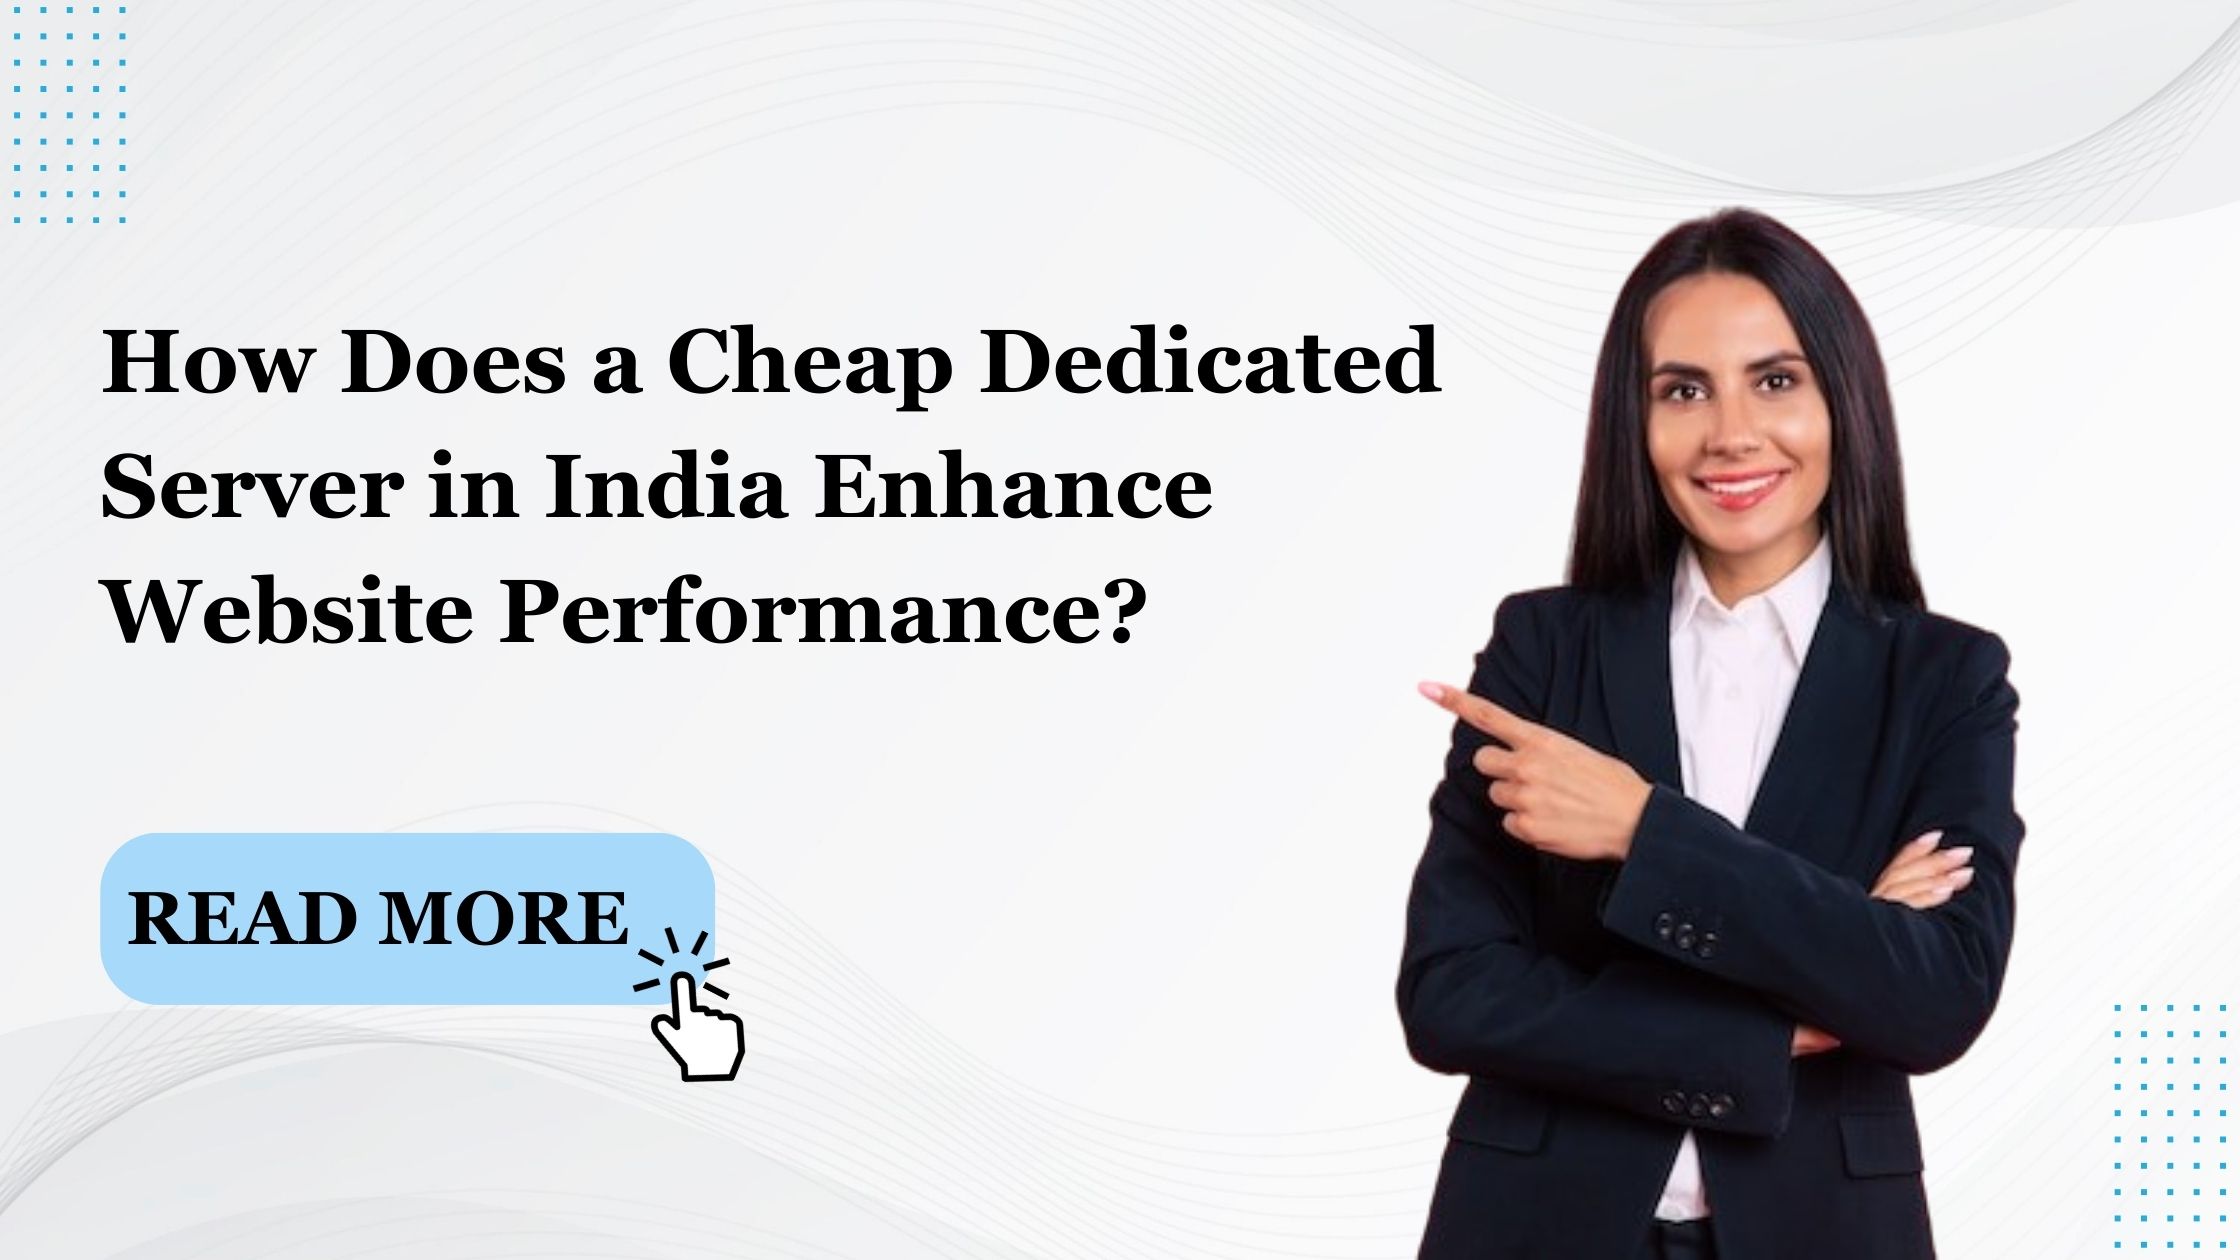 How Does a Cheap Dedicated Server in India Enhance Website Performance